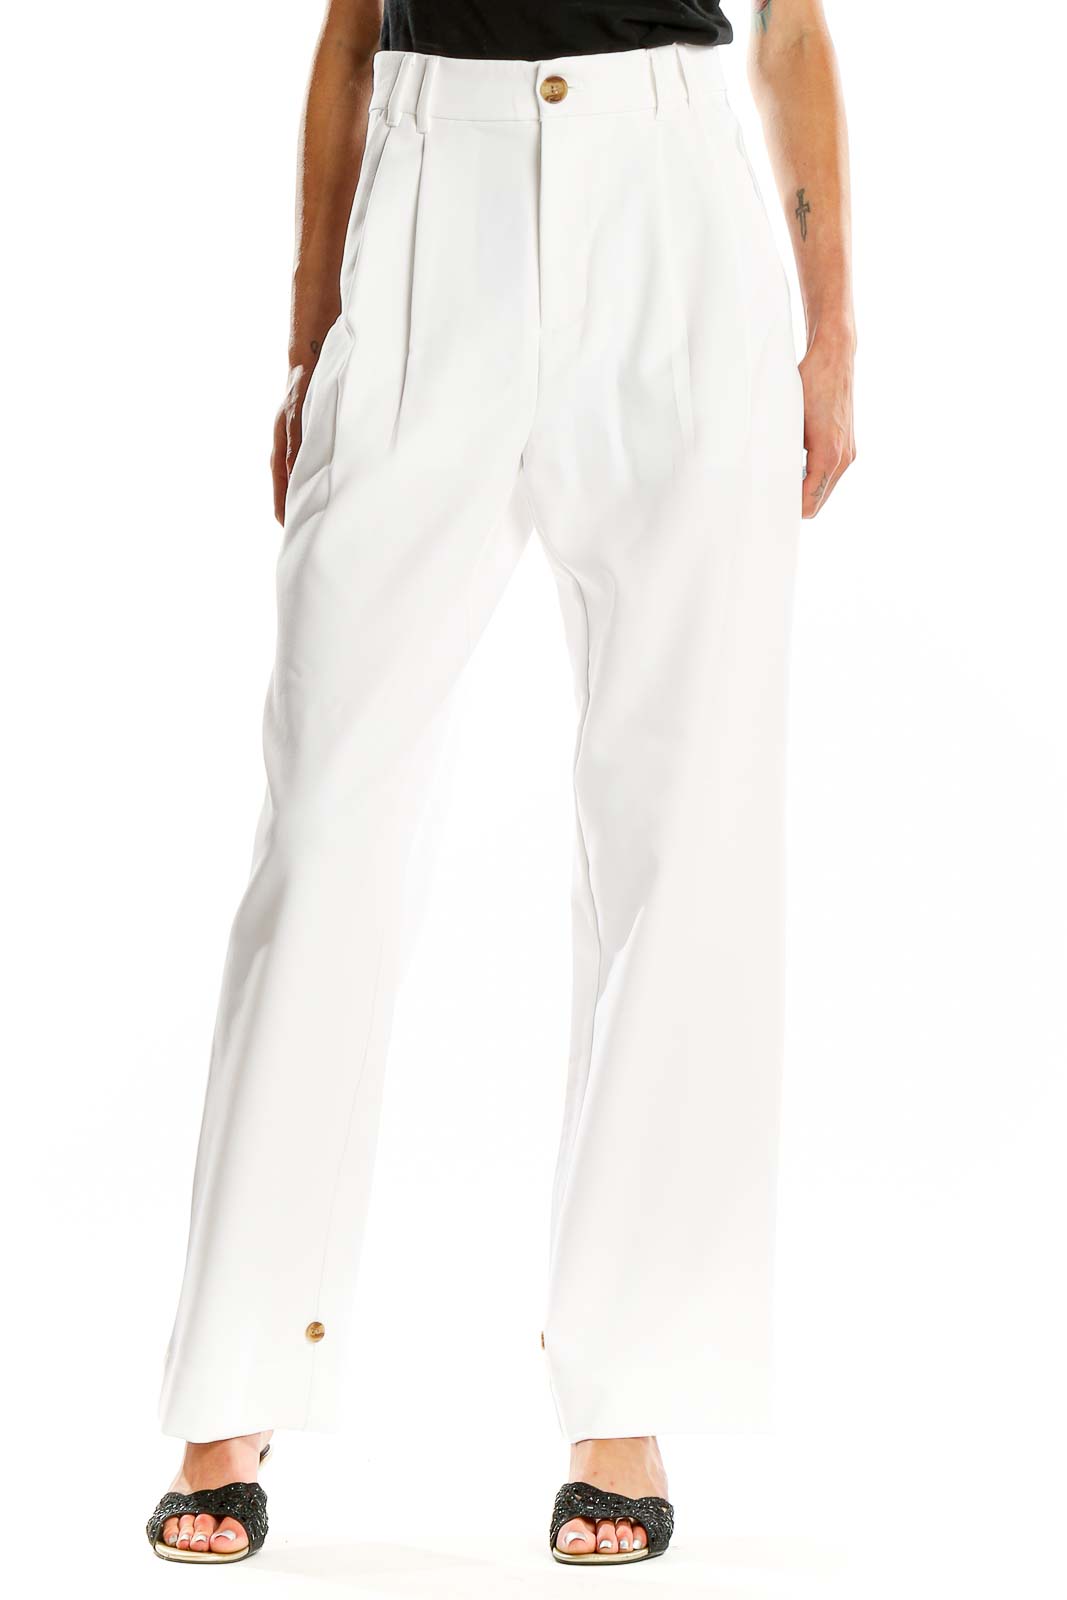 White All Day Wear Trouser Front